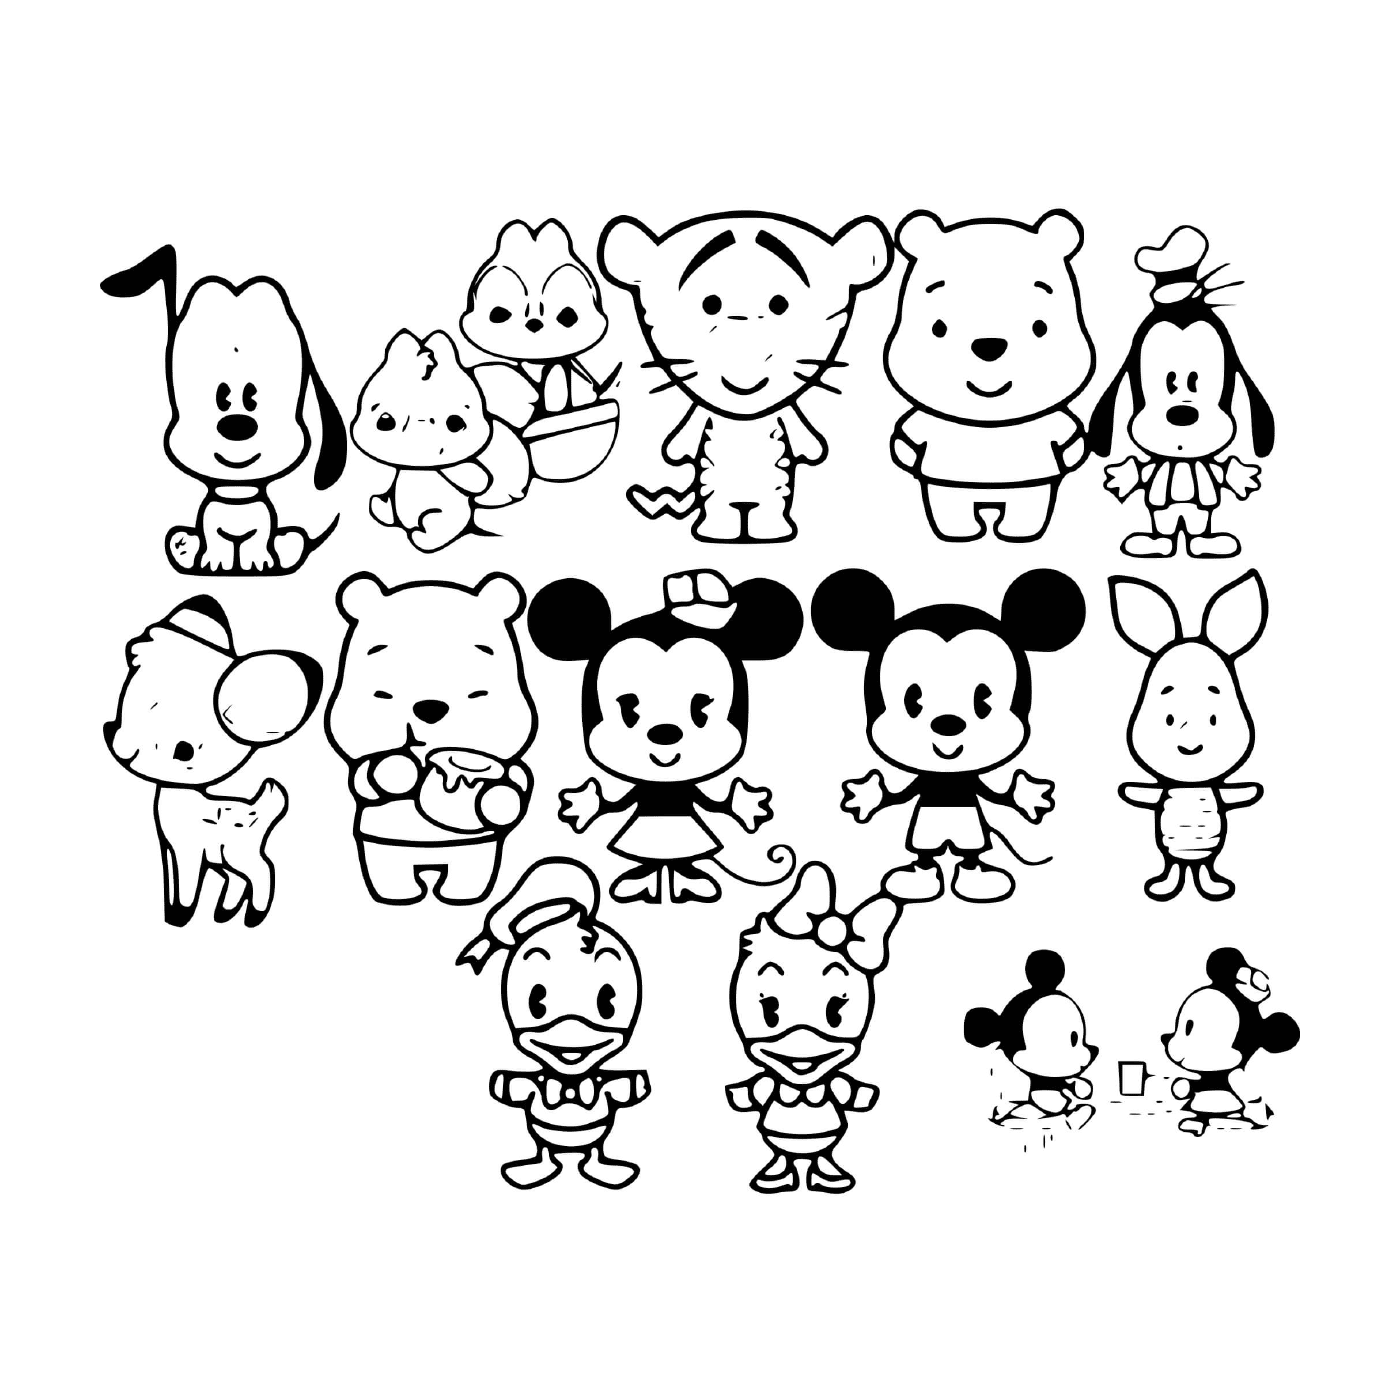  Baby characters from Disney 